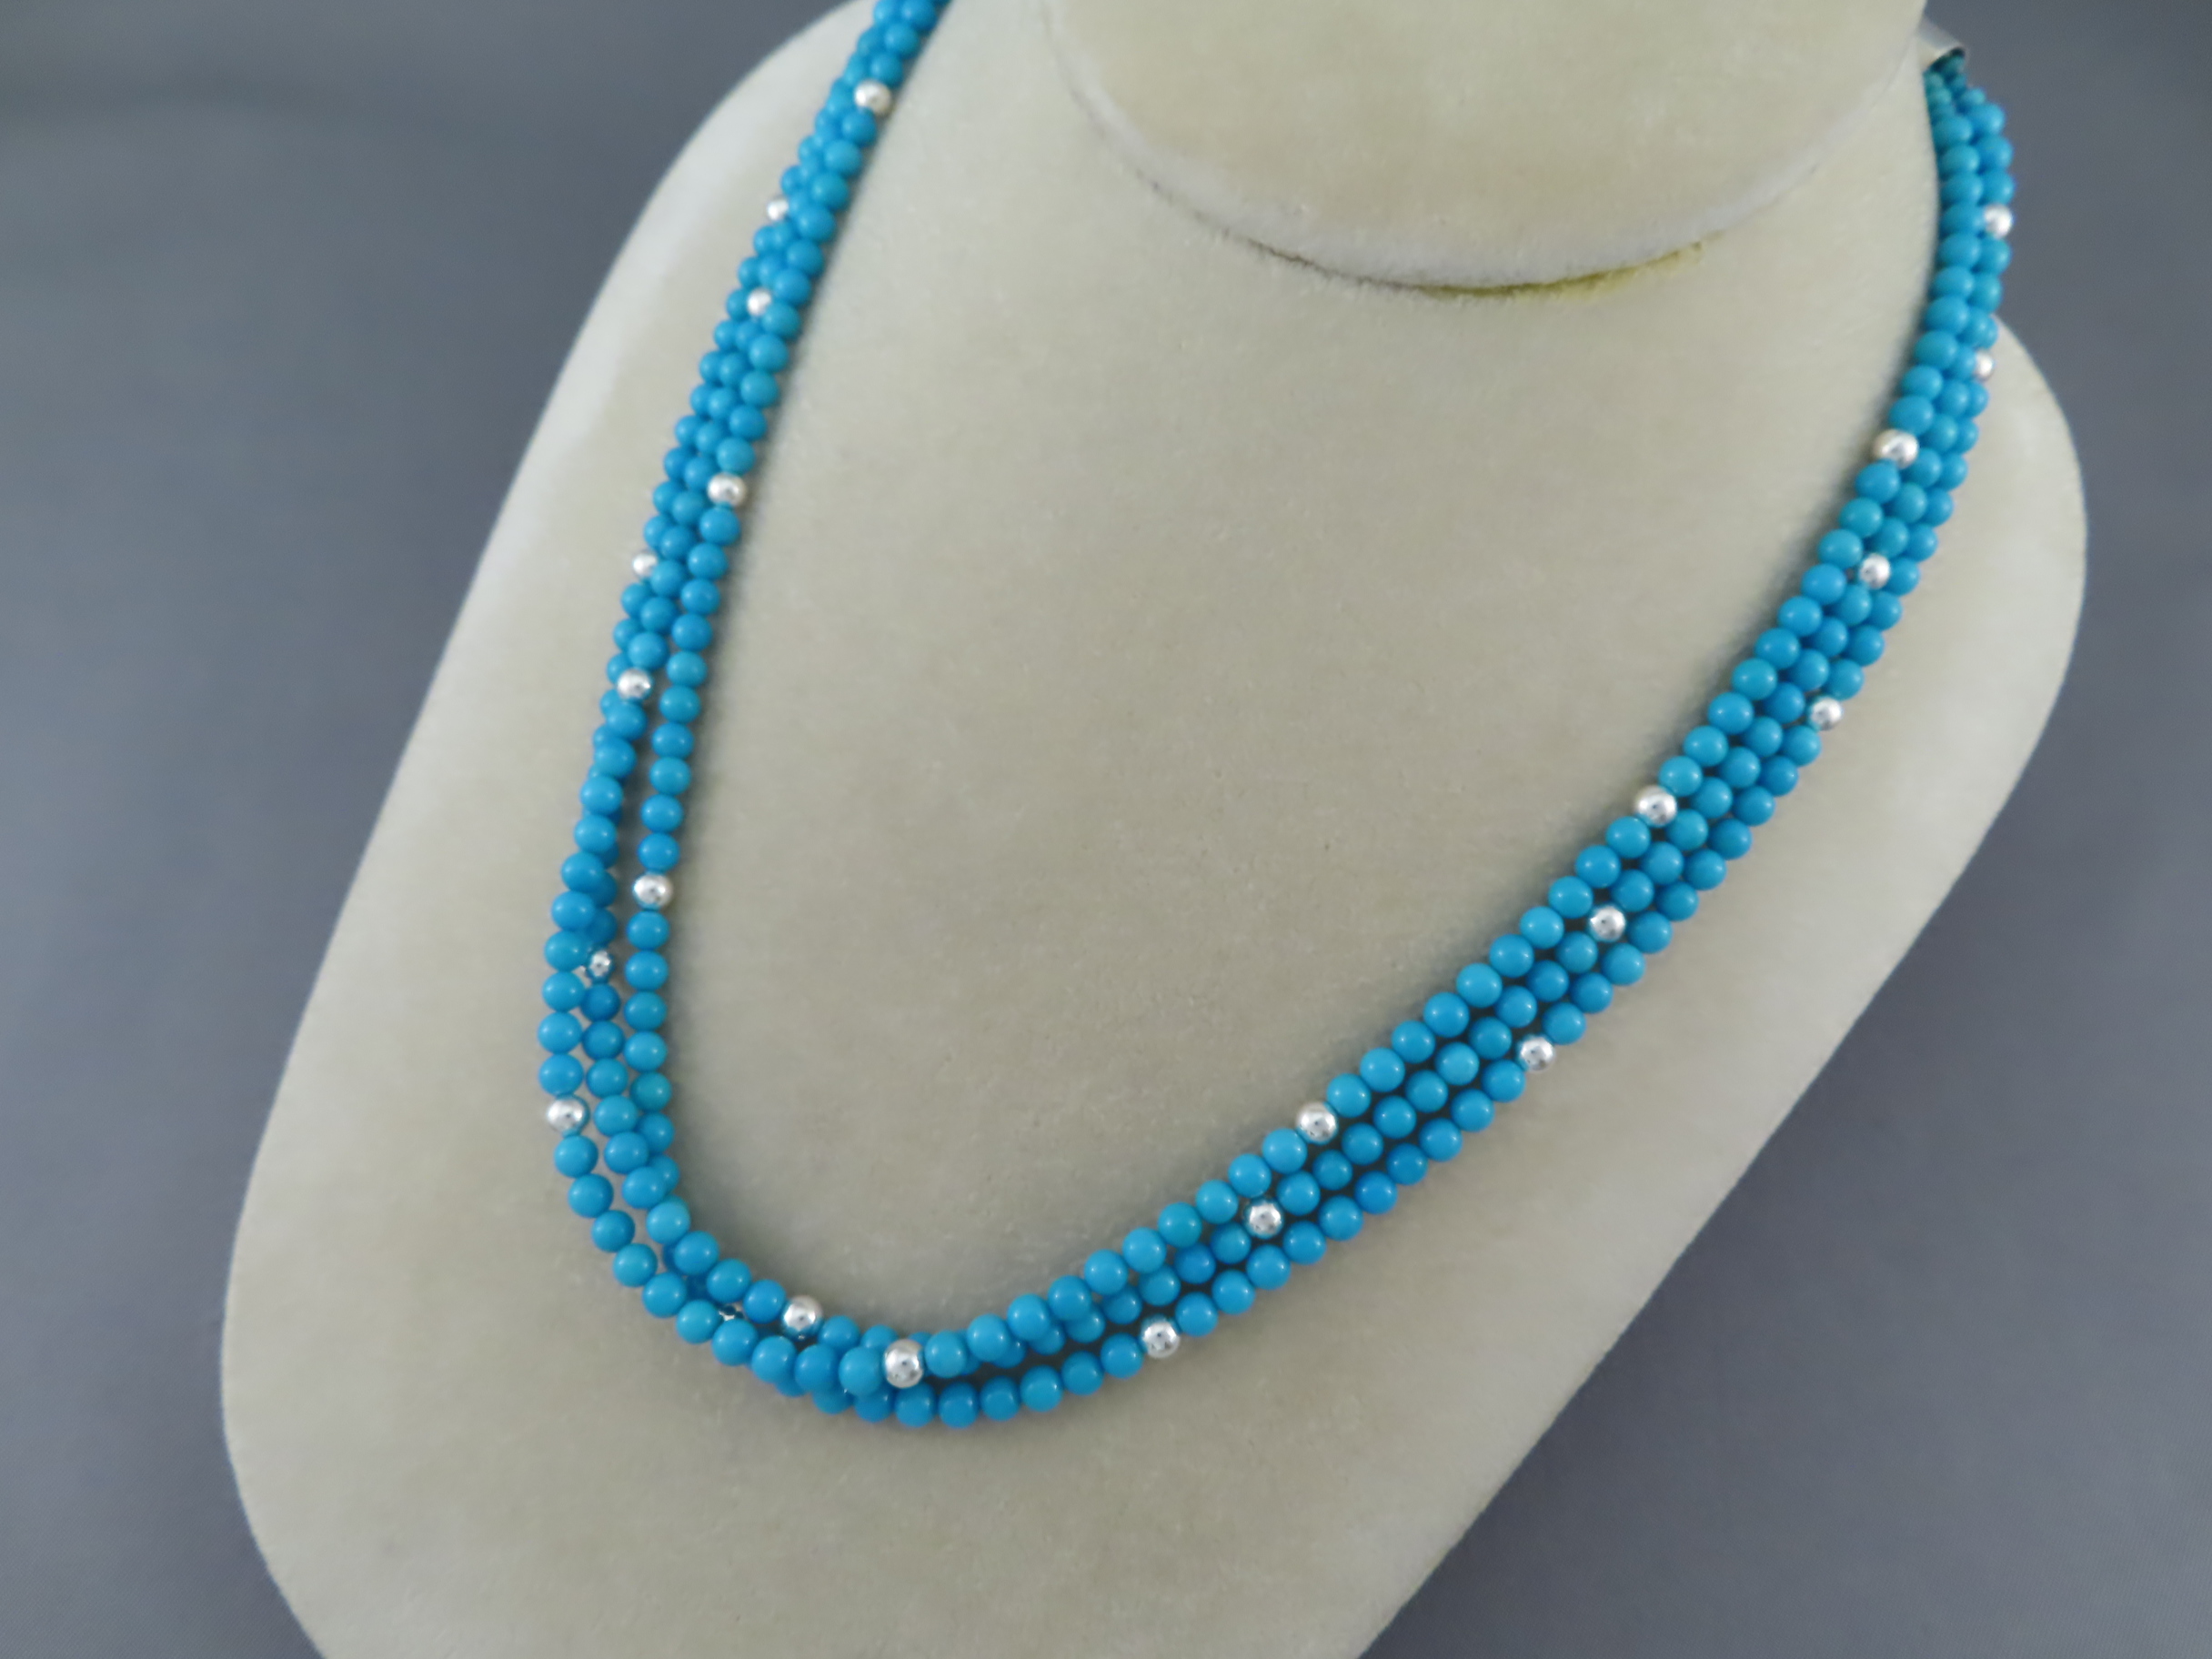 3-Strand Sleeping Beauty Turquoise Necklace by Desiree Yellowhorse ...